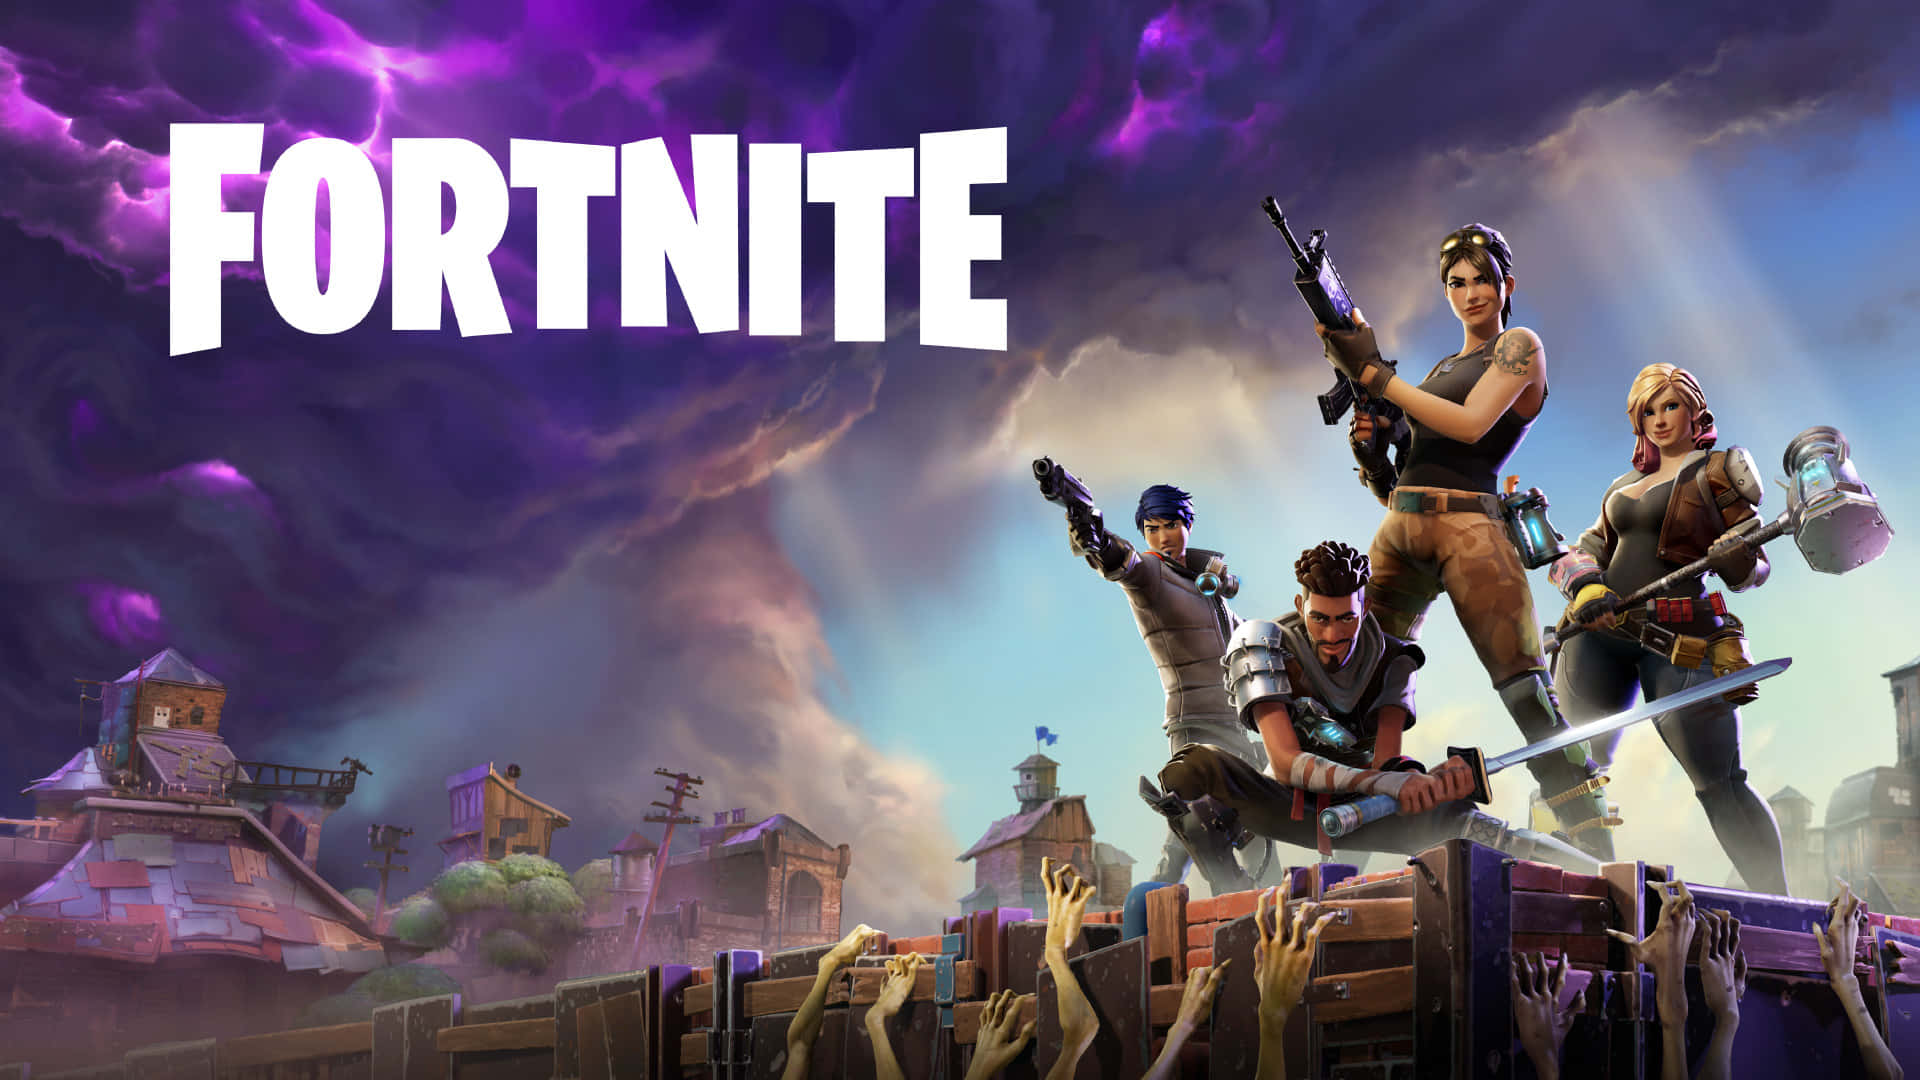 Play Fortnite in Style and Win Any Battle